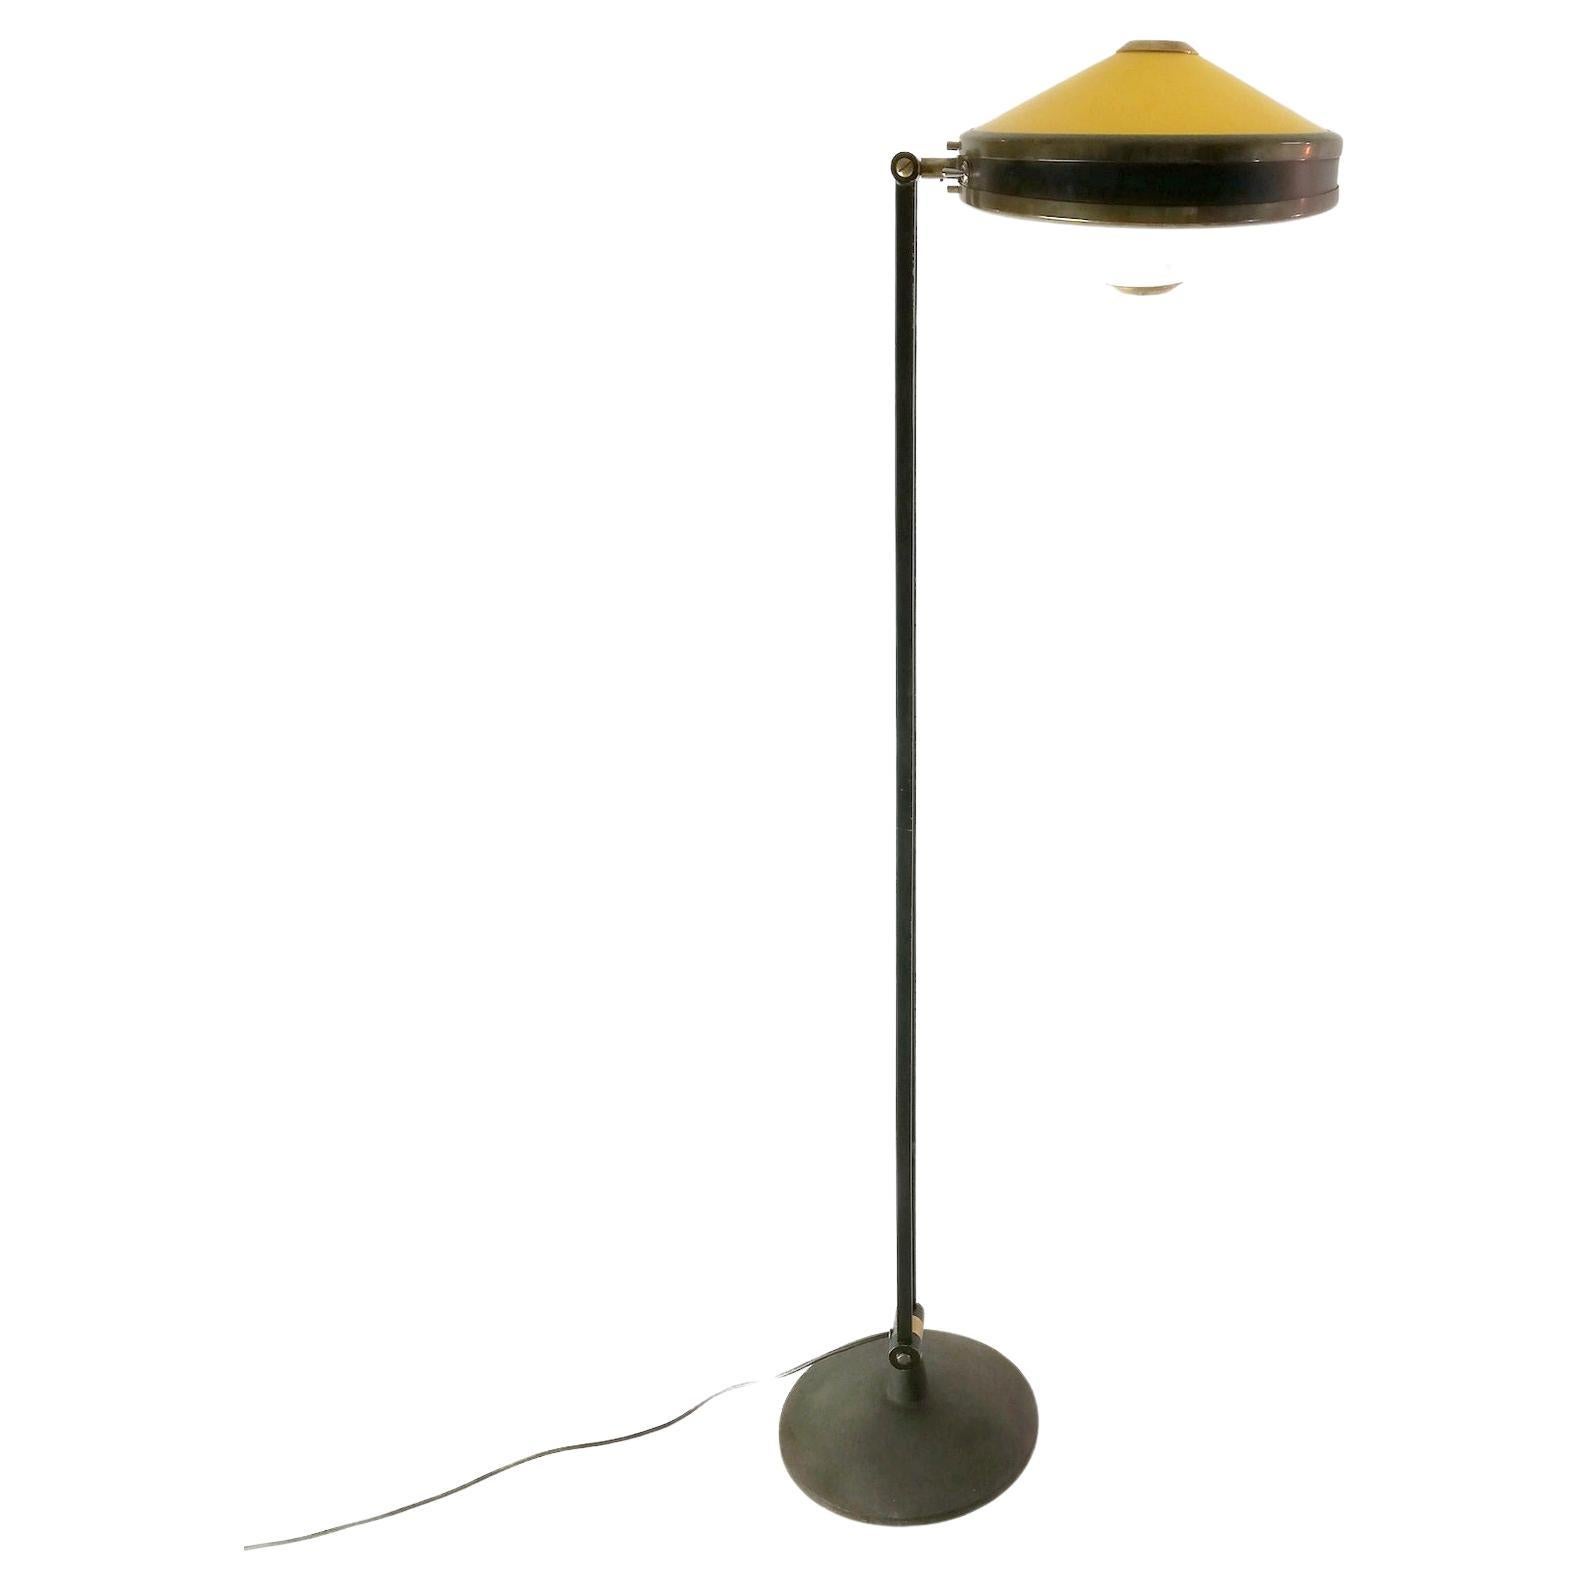 Black lacquered steel and metal, brass, yellow and white tinted Perspex mod. 4067 floor lamp by Stilnovo
In very good condition and well-functioning. 

Domus, no. 380, July 1961, p. 15
Roberto Aloi, L'arredamento moderno, Settima Serie, Milan,